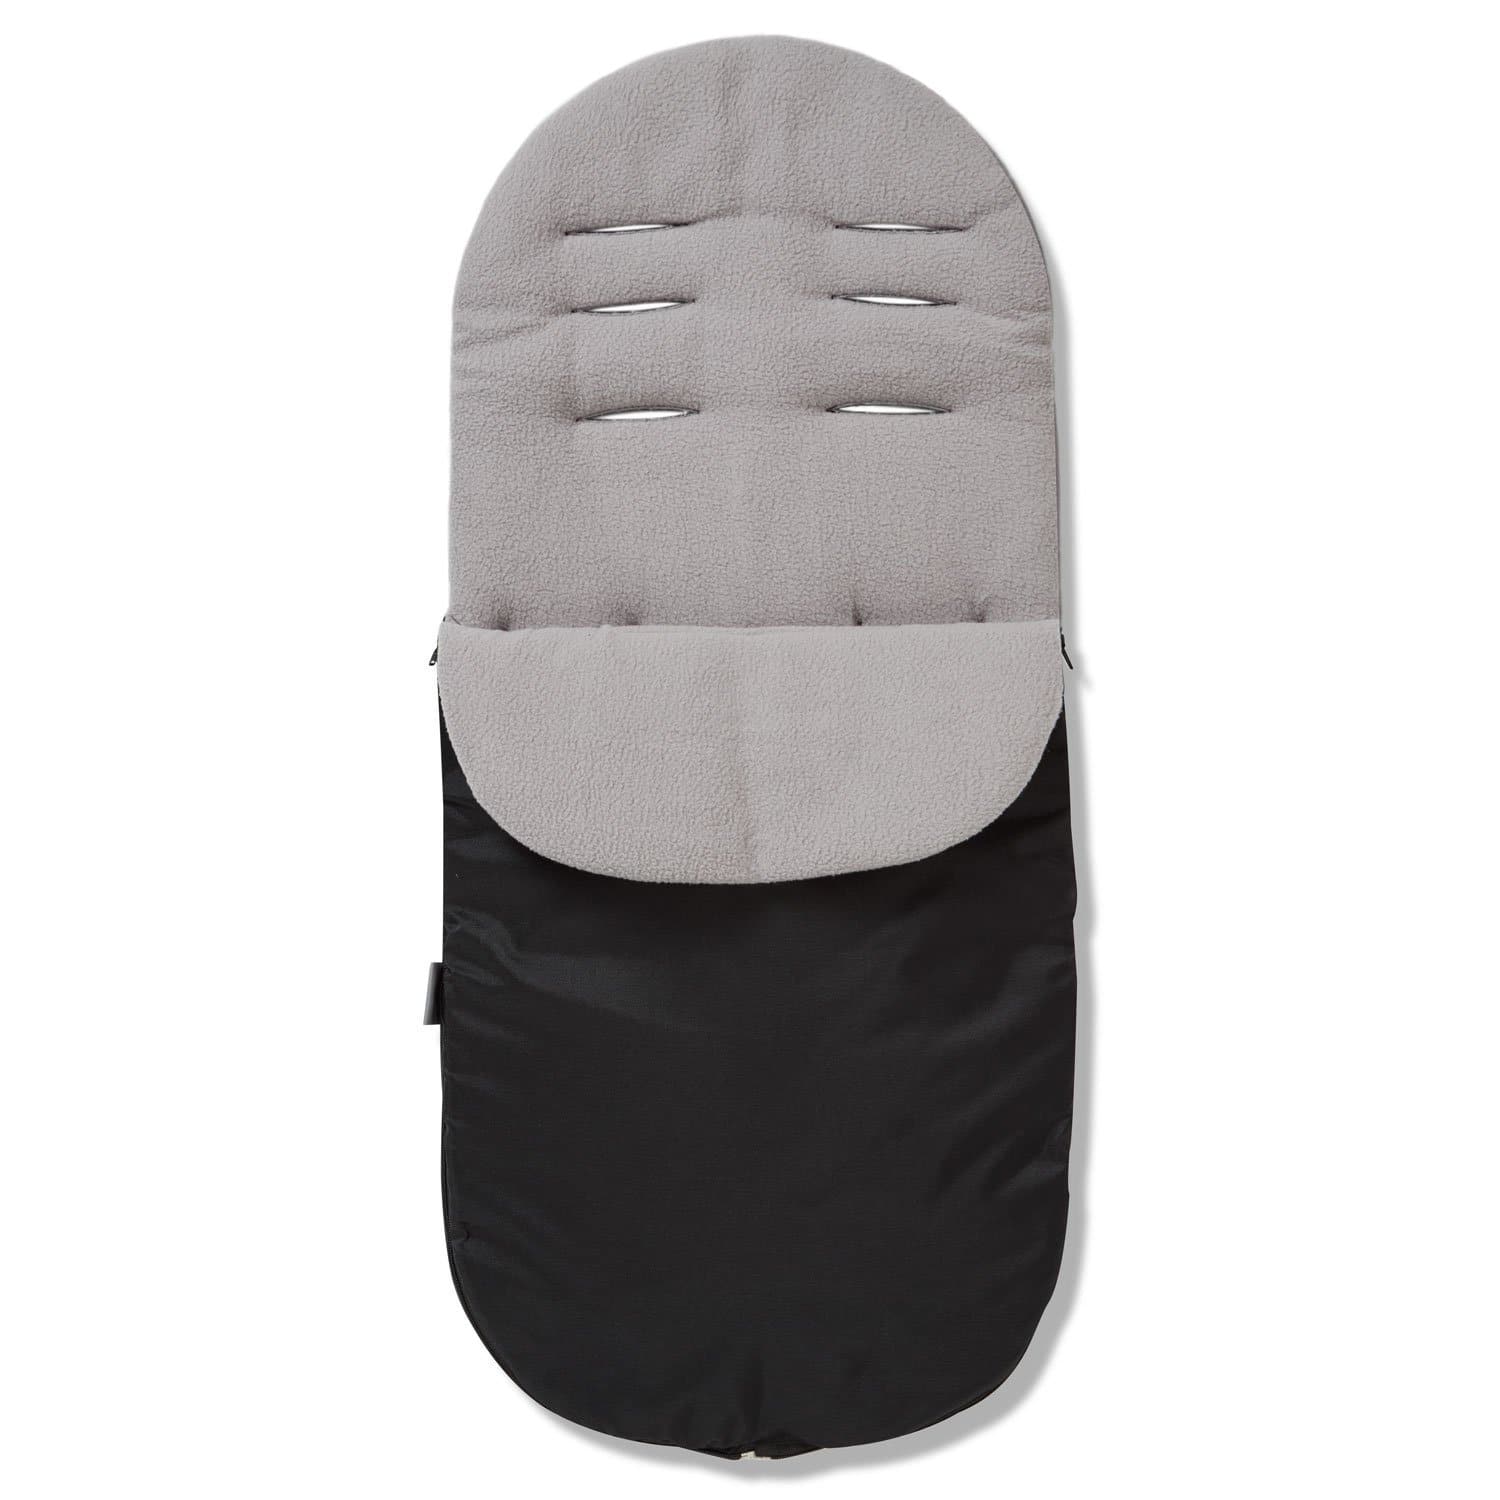 Footmuff / Cosy Toes Compatible with Casual - Grey / Fits All Models | For Your Little One